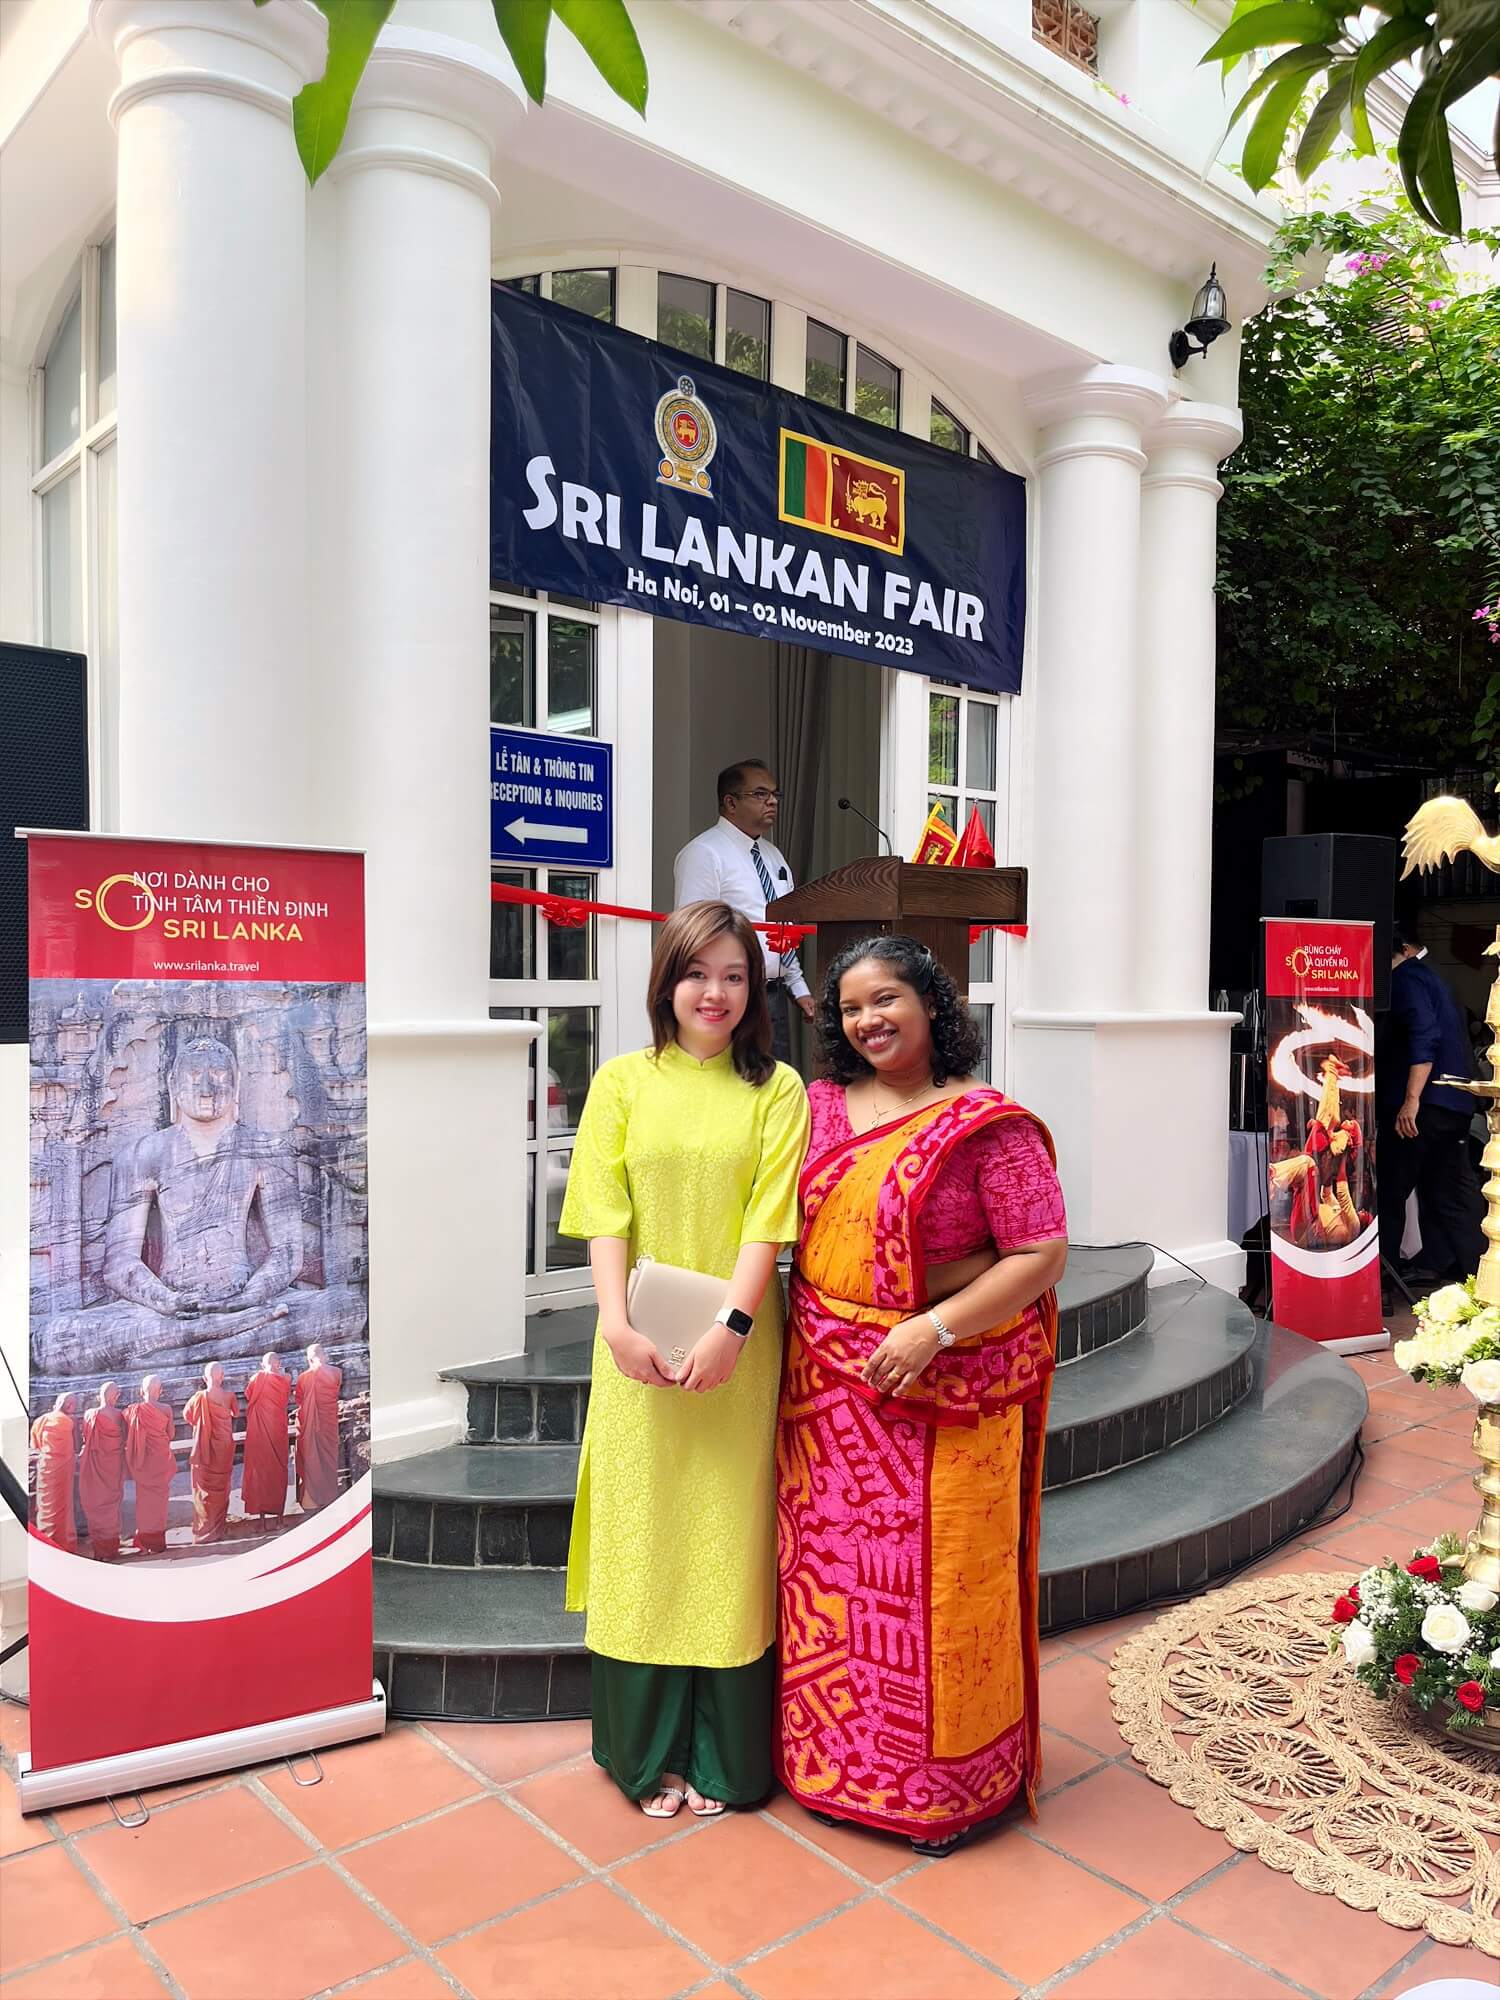 Oud Vietnam’s Participation in Sri-Lanka Fair – Product Exhibition and Business Networking Event